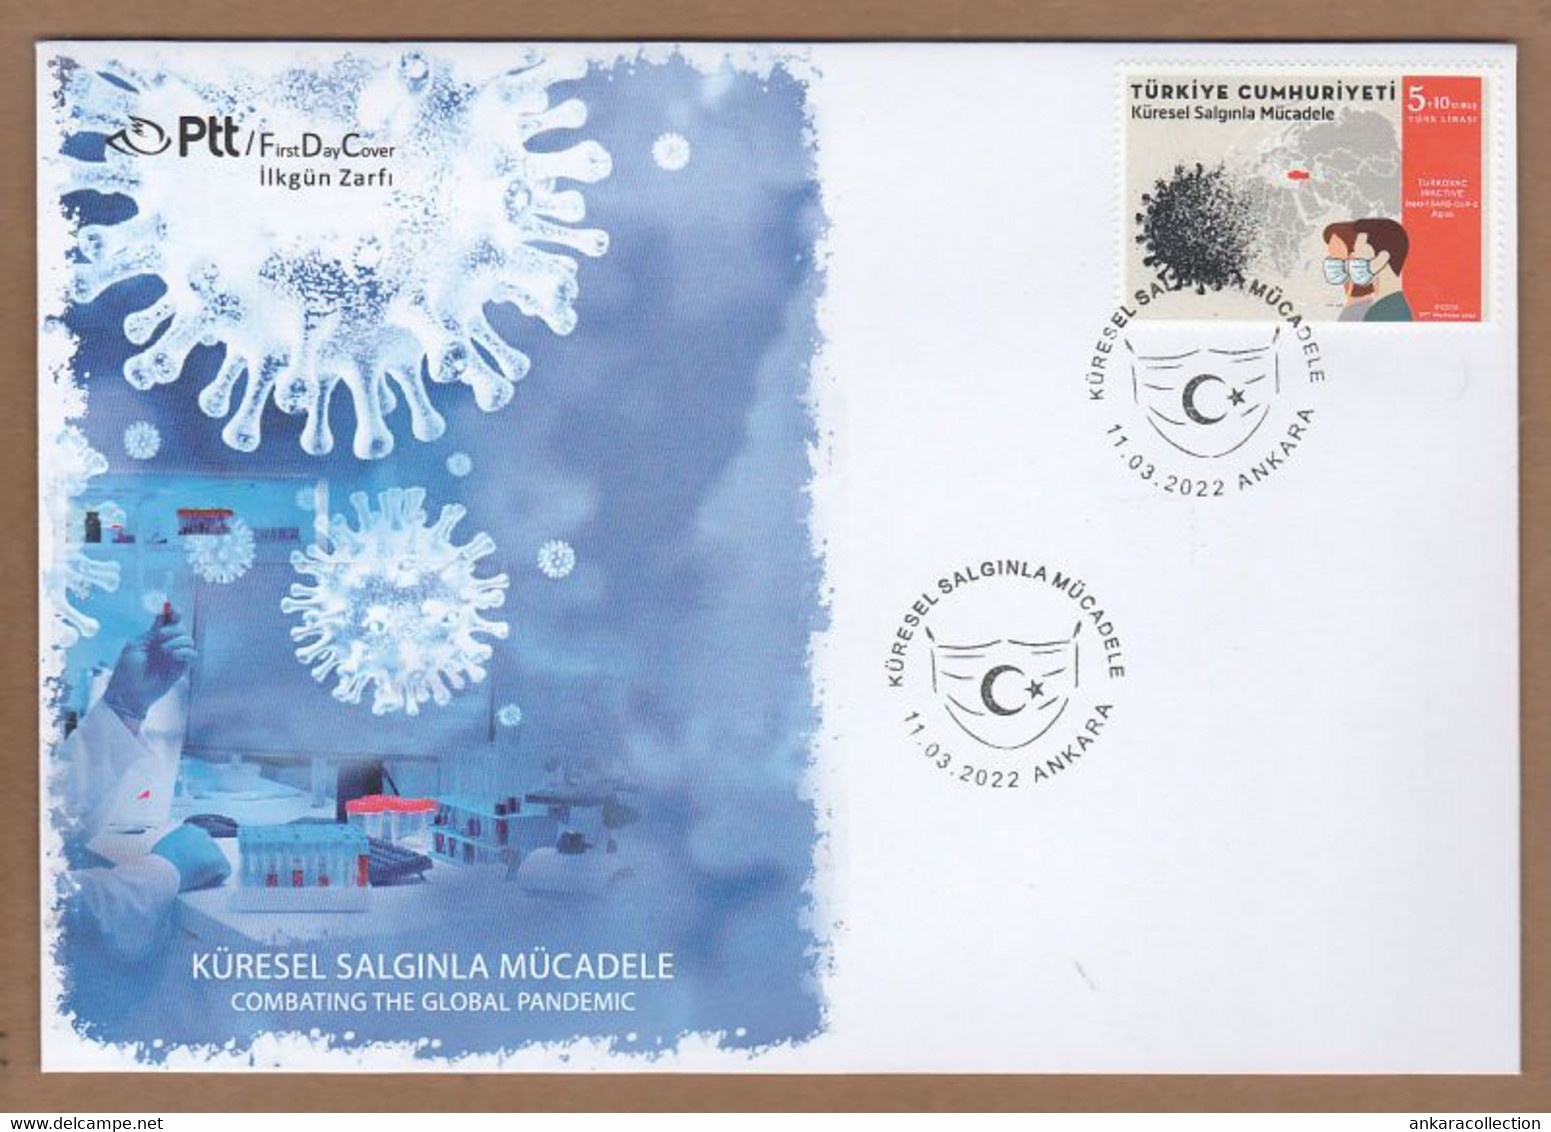 AC - TURKEY FDC - COMBATING THE GLOBAL PANDEMIC - COVID 19 MNH  ANKARA, 11 MARCH 2022 - FDC